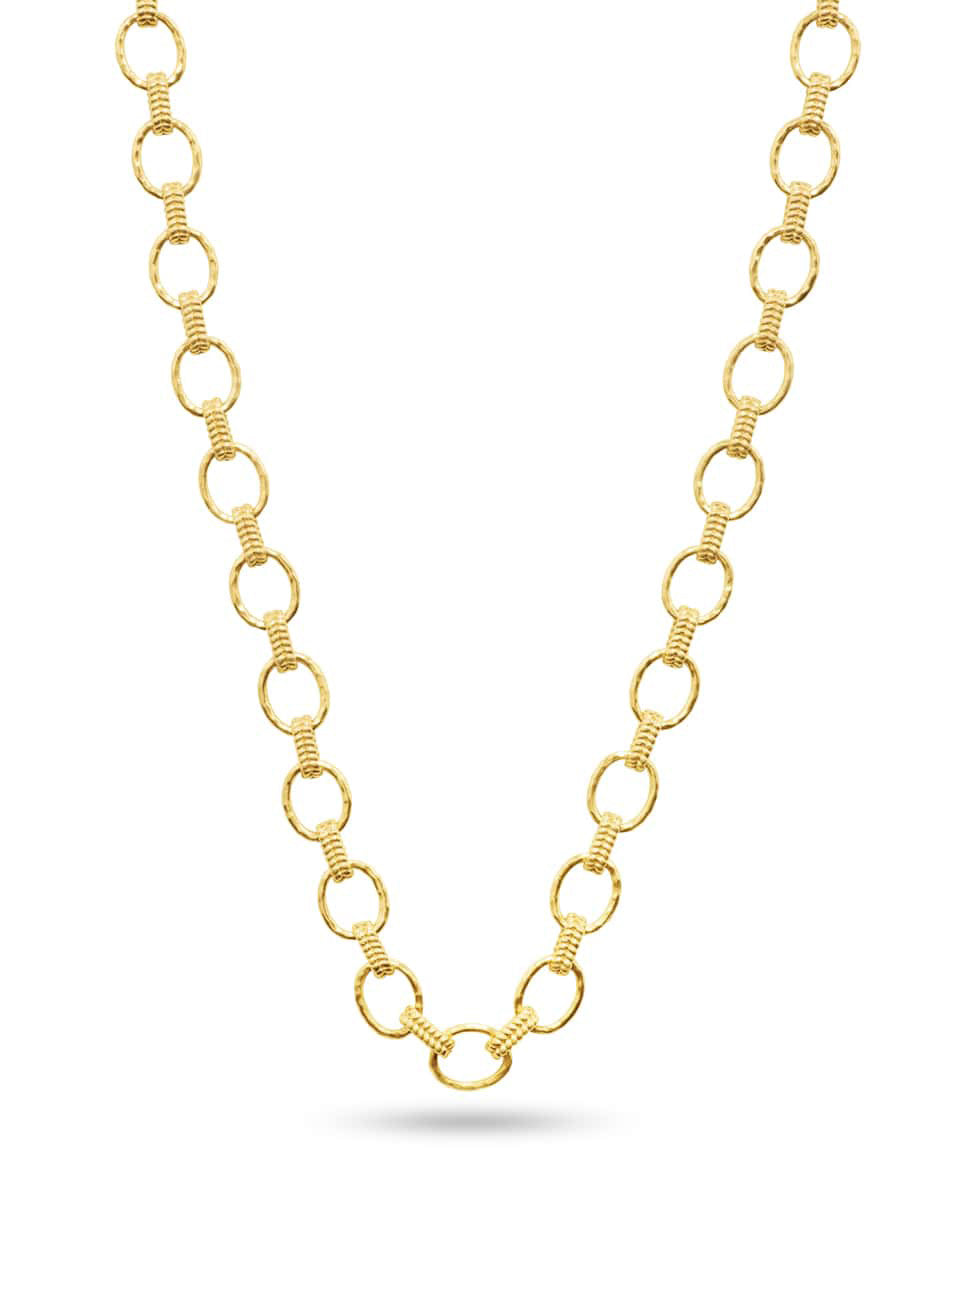 capucine de wulf cleopatra small link chain necklace in gold-detail view